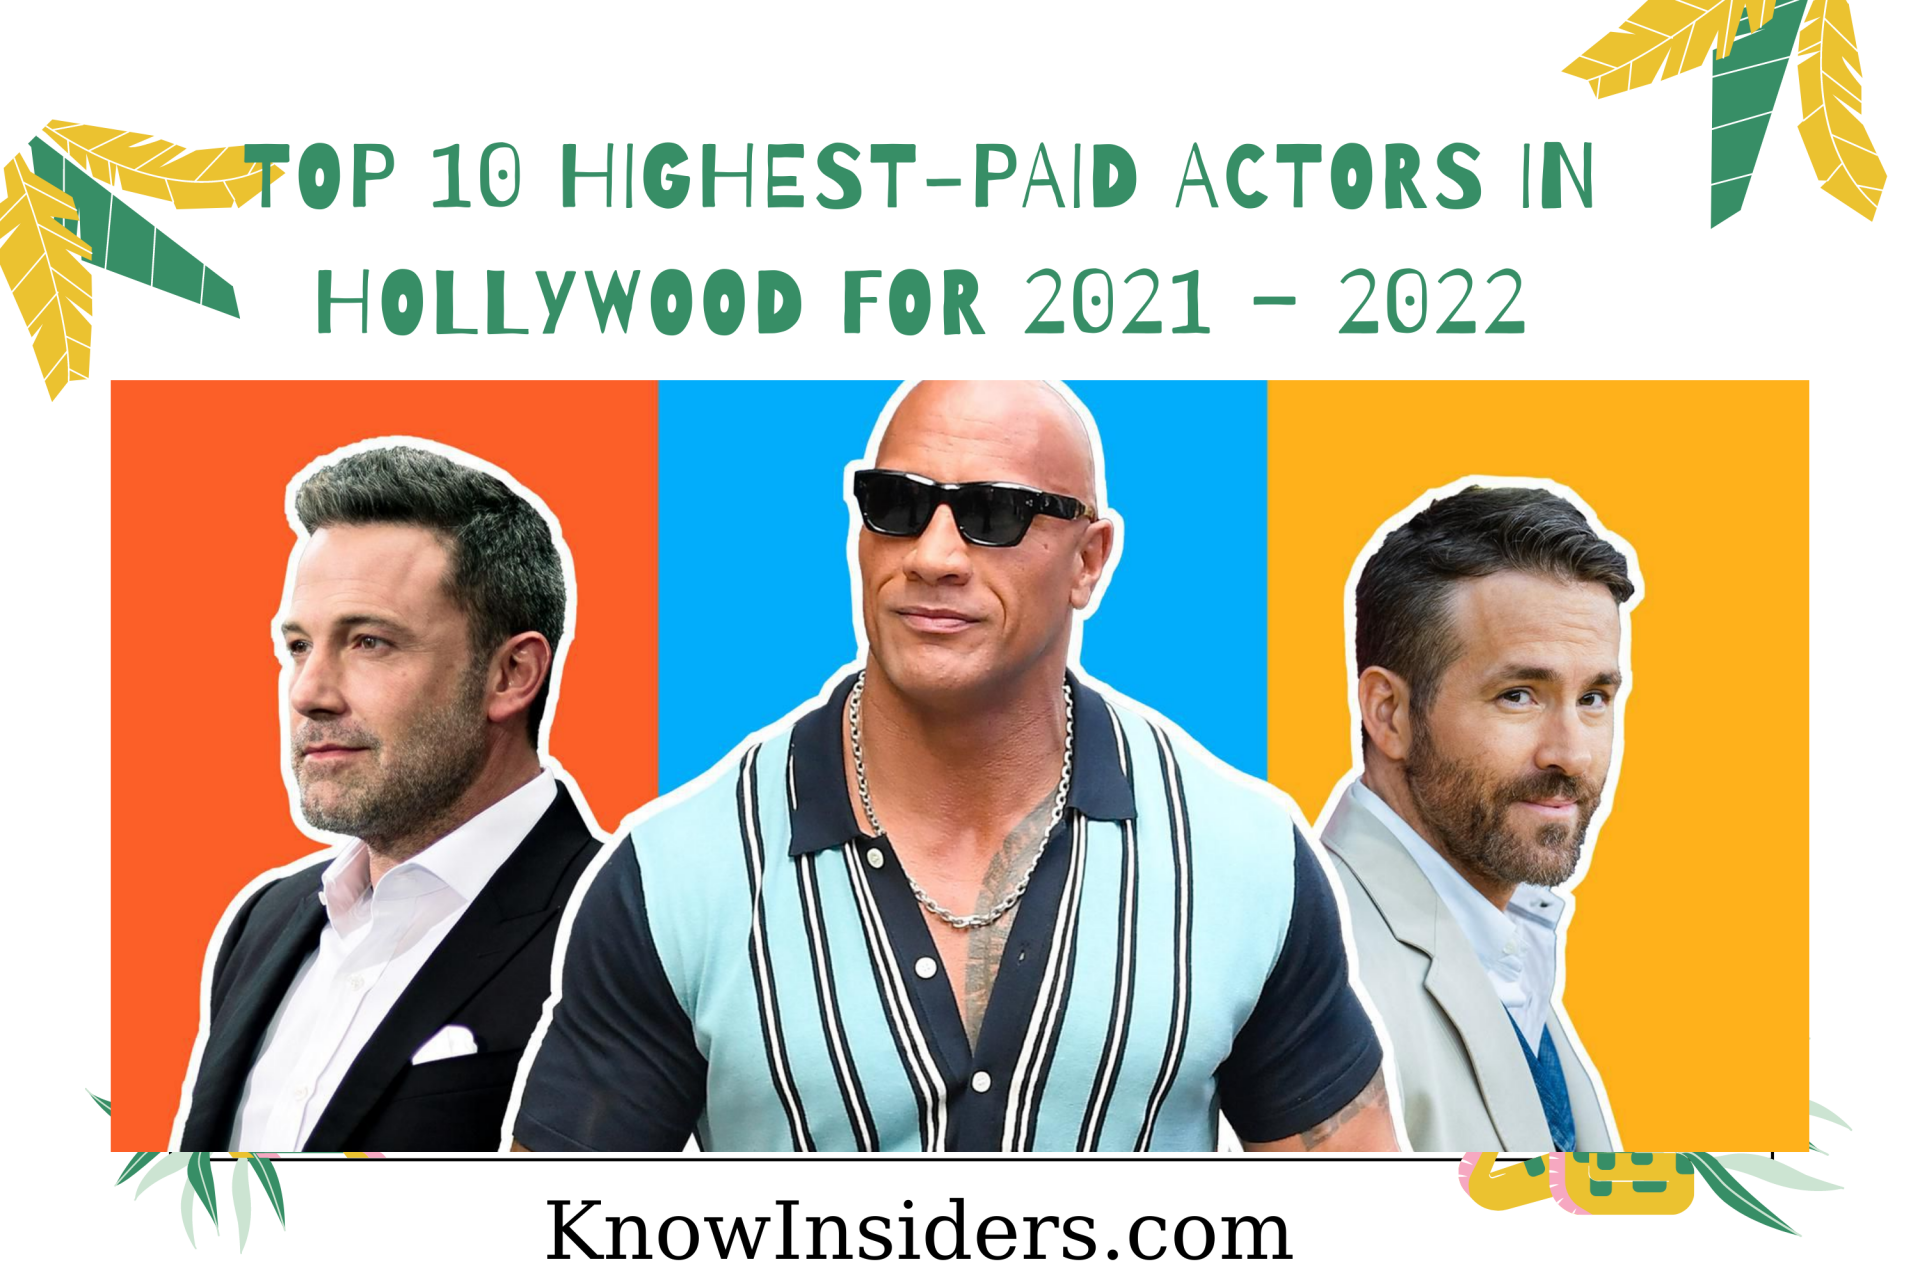 Top 10 Highest-Paid Actors in Hollywood for 2021/2022